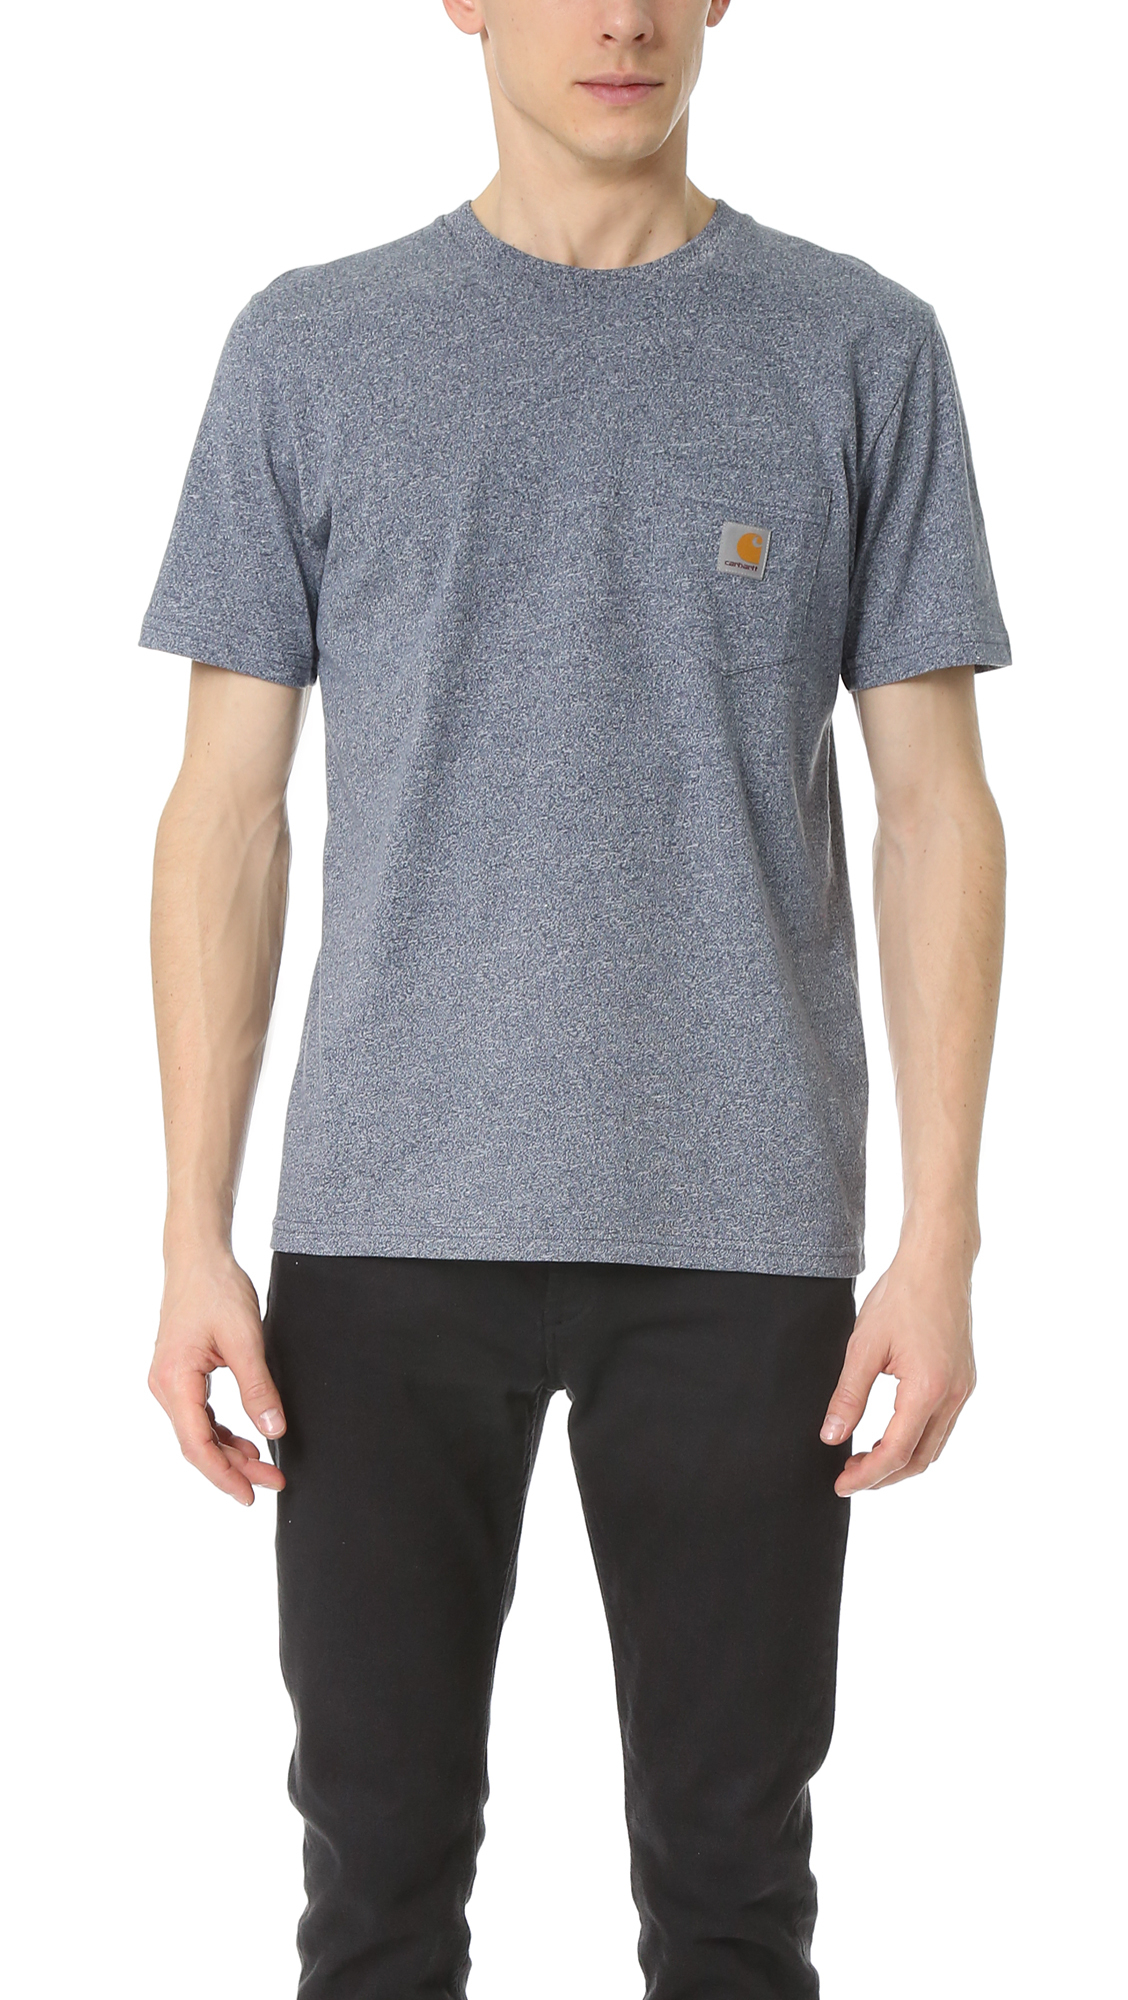 Lyst - Carhartt Wip Heathered Pocket Tee in Blue for Men